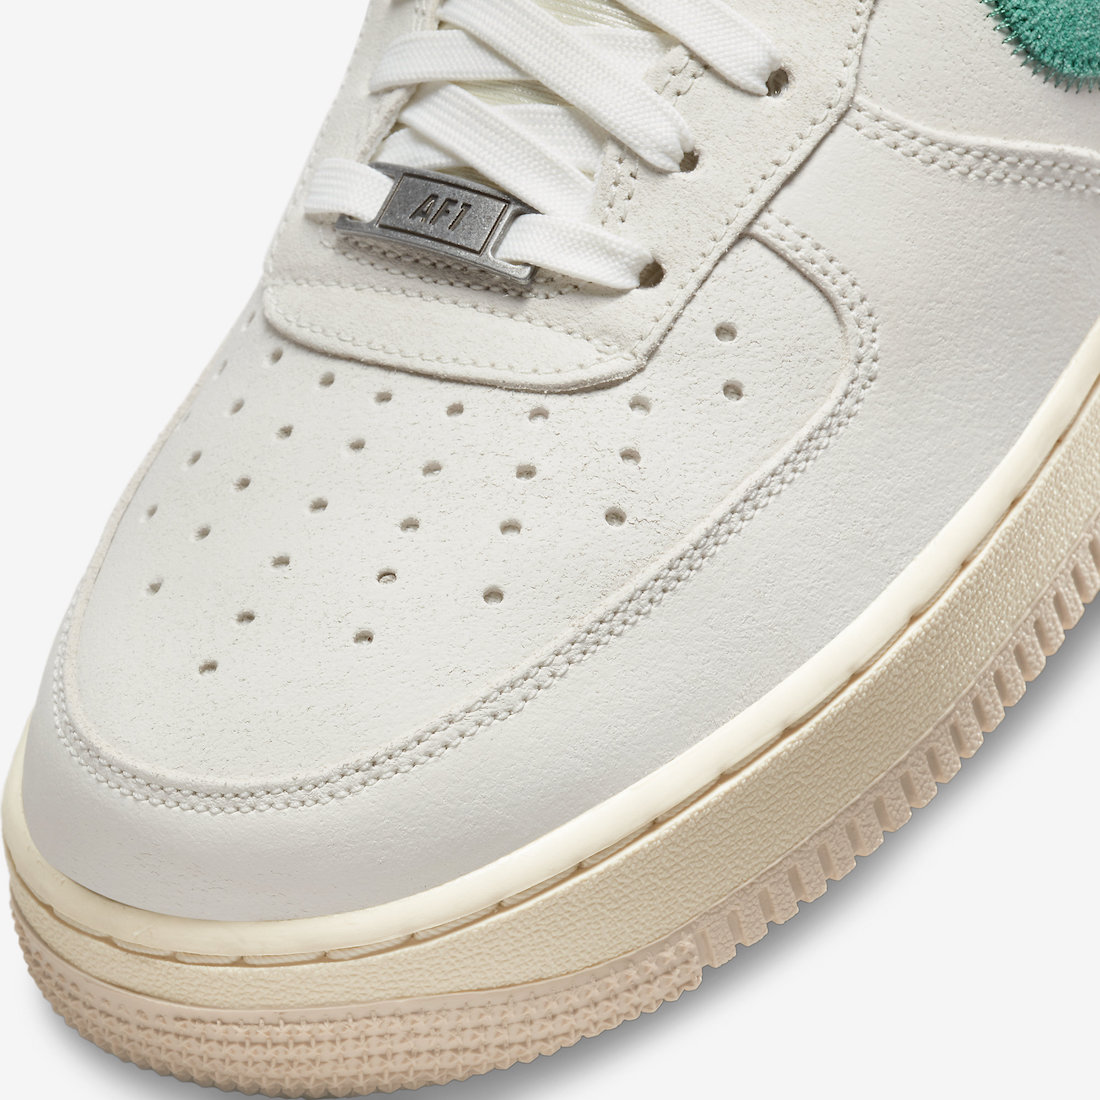 Nike Air Force 1 Test of Time DO5876-100 Release Date